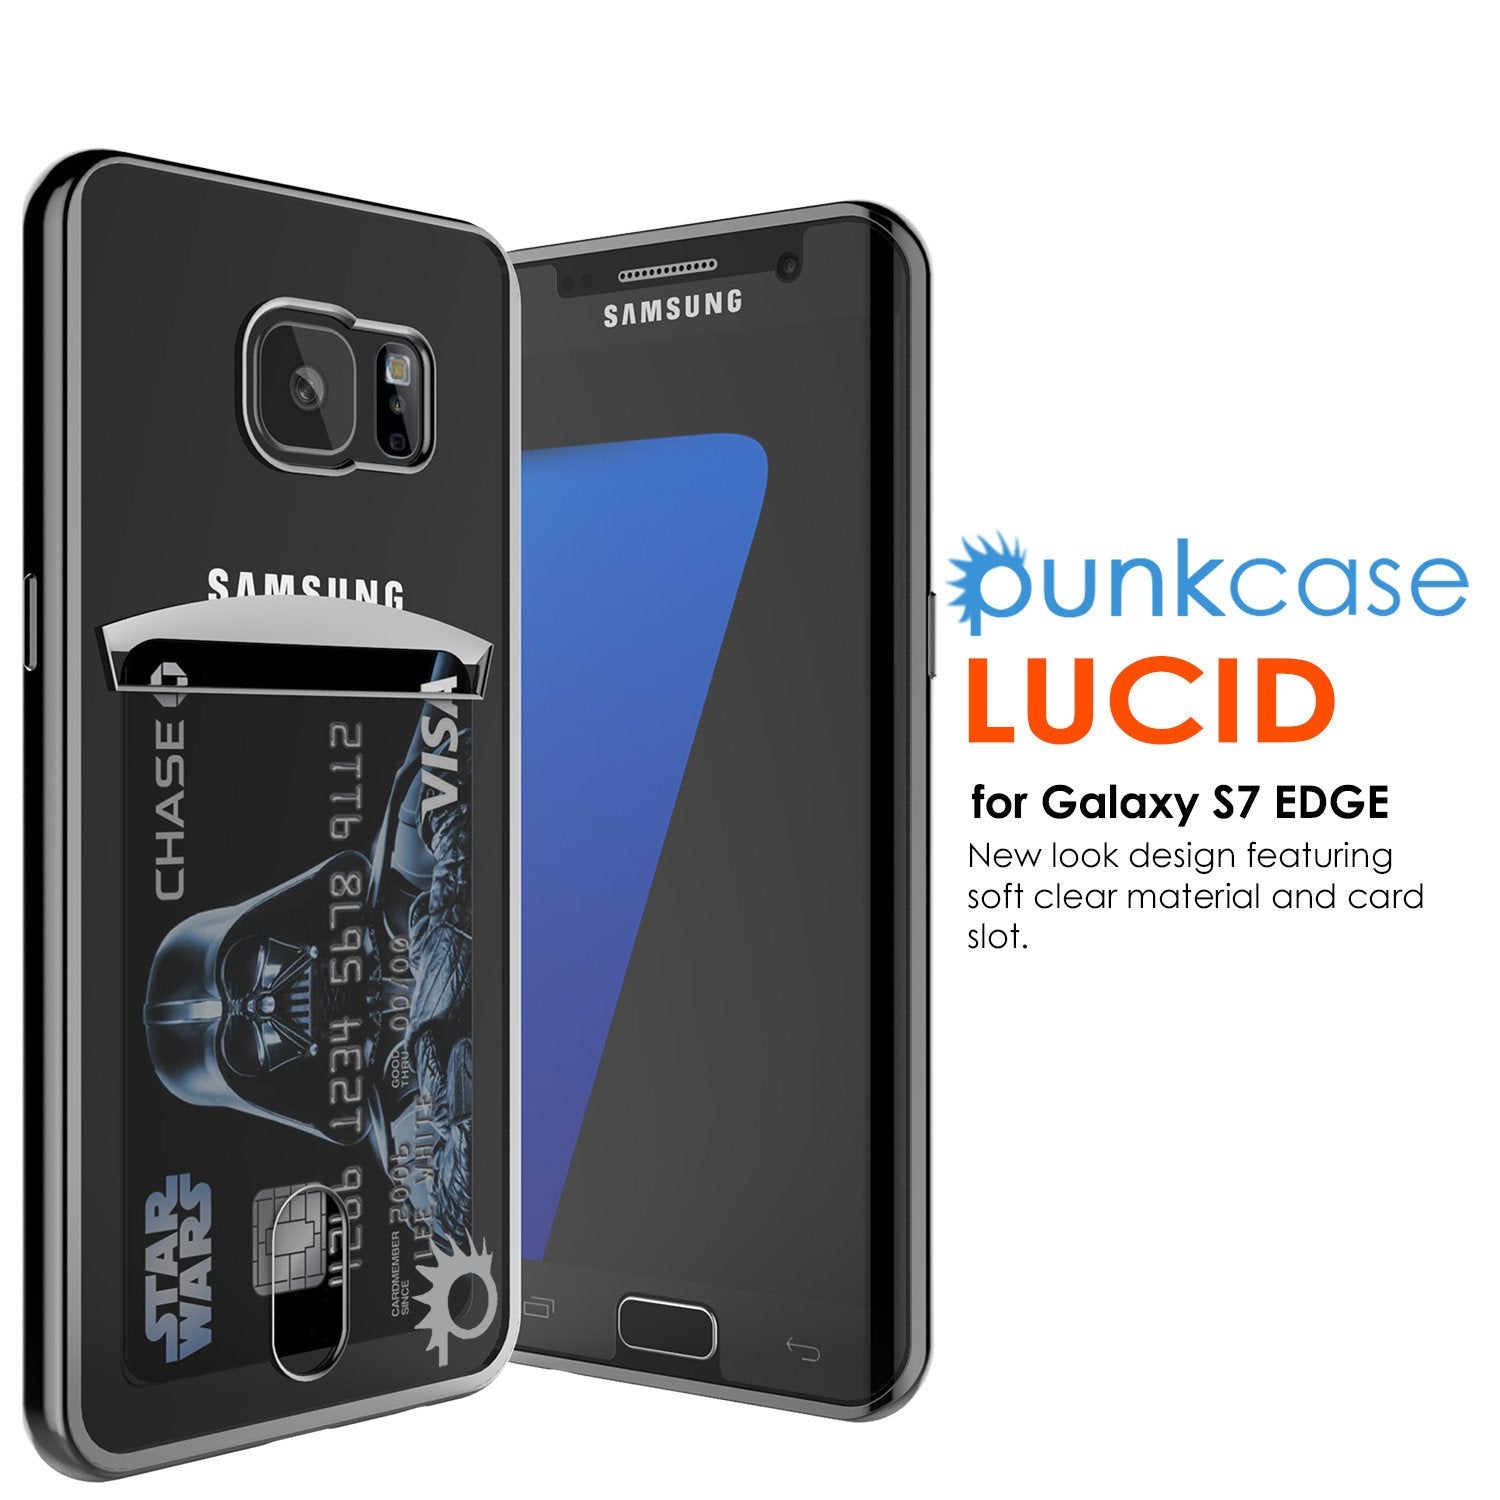 Galaxy S7 EDGE Case, PUNKCASE® LUCID Black Series | Card Slot | SHIELD Screen Protector | Ultra fit